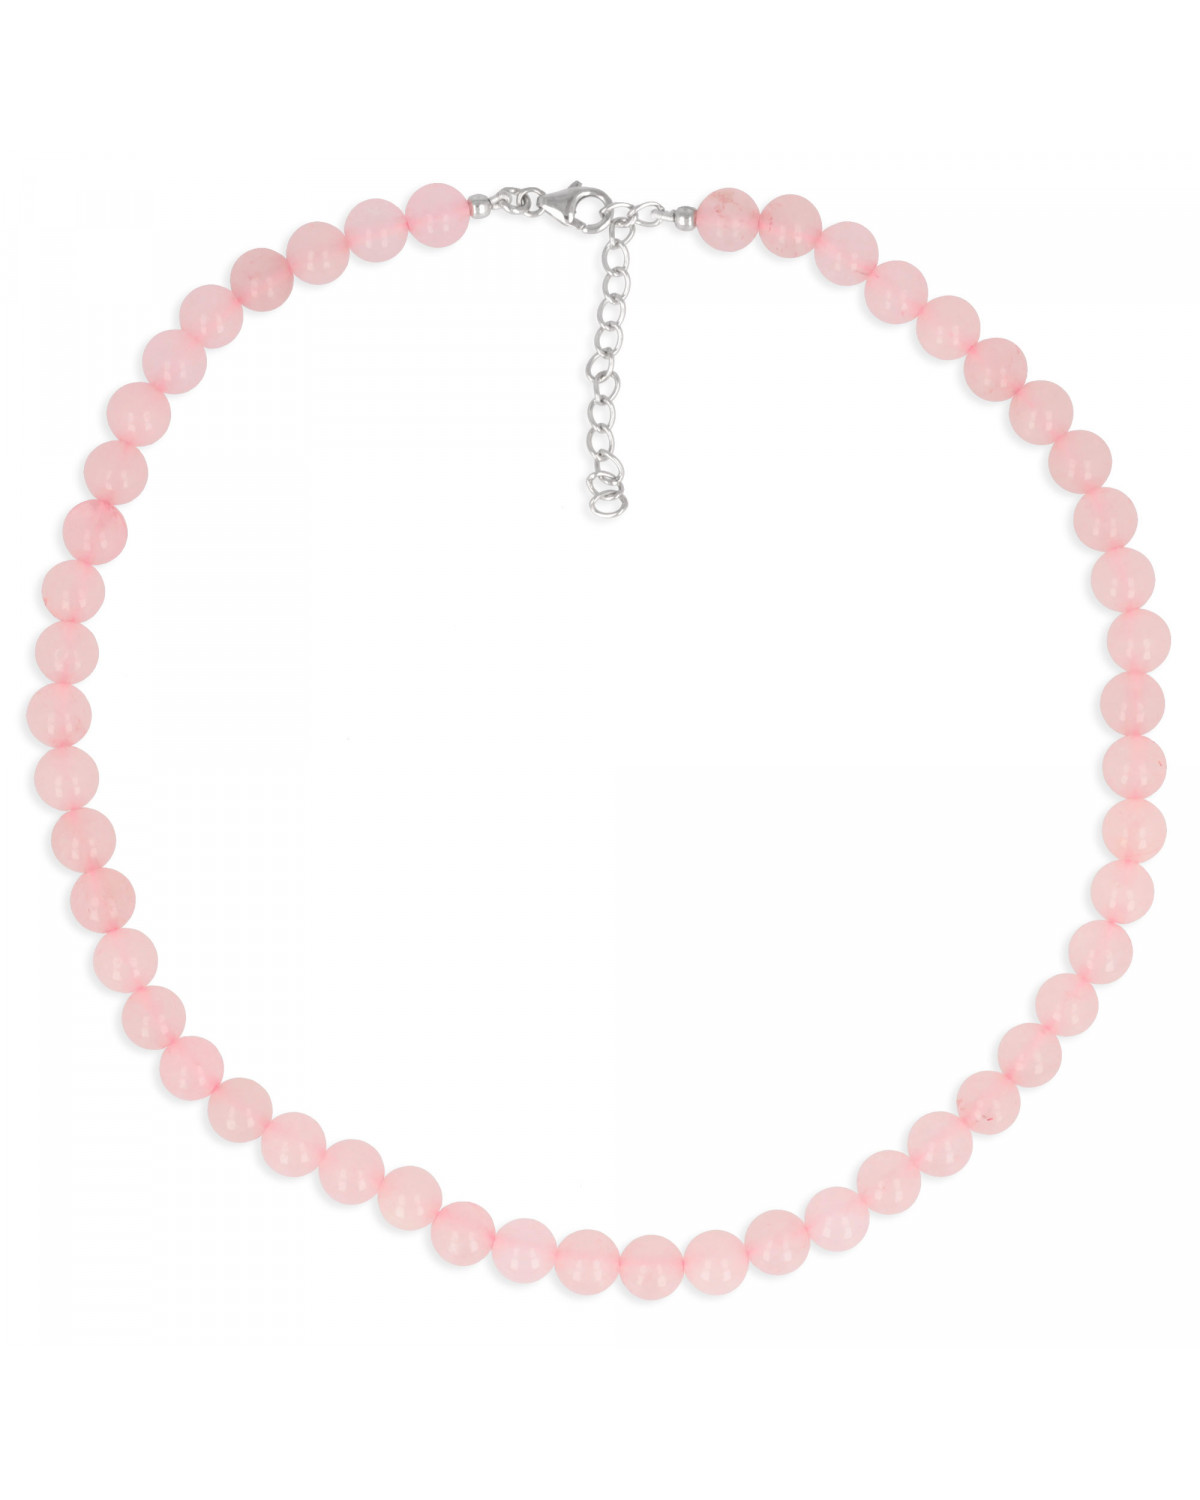 Idea gift for her Necklace Woman pink Quartz Gems